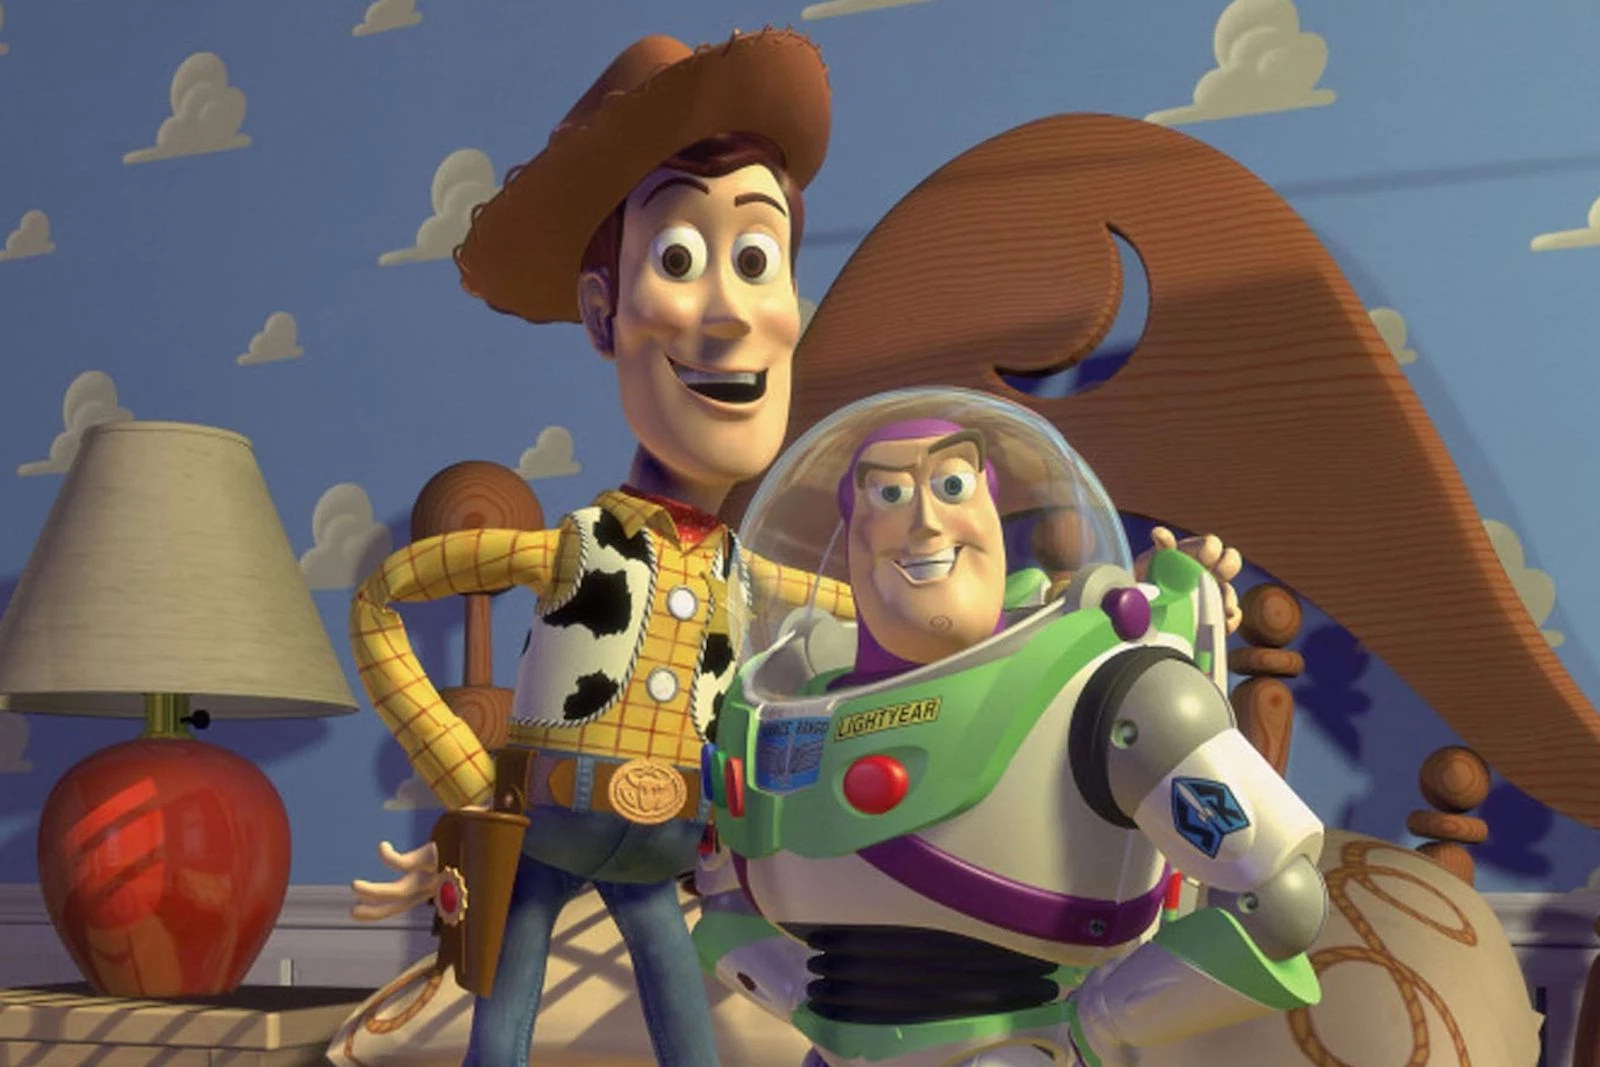 Kids Brutally Prank Mom, Edit 'Toy Story' To Have Everybody Die In The End